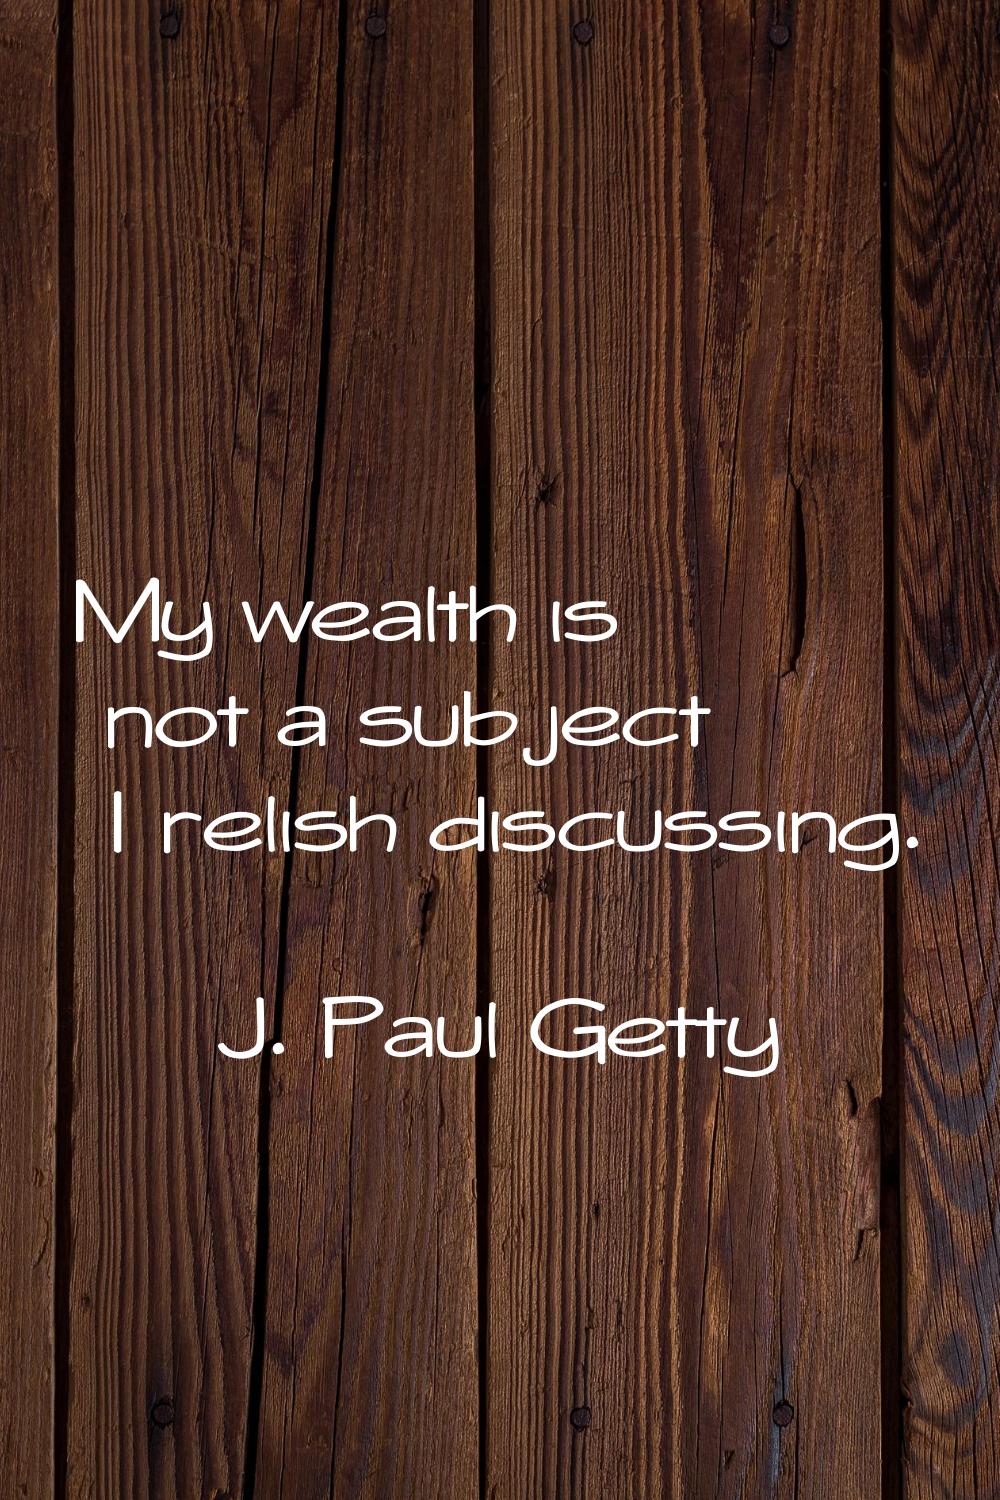 My wealth is not a subject I relish discussing.